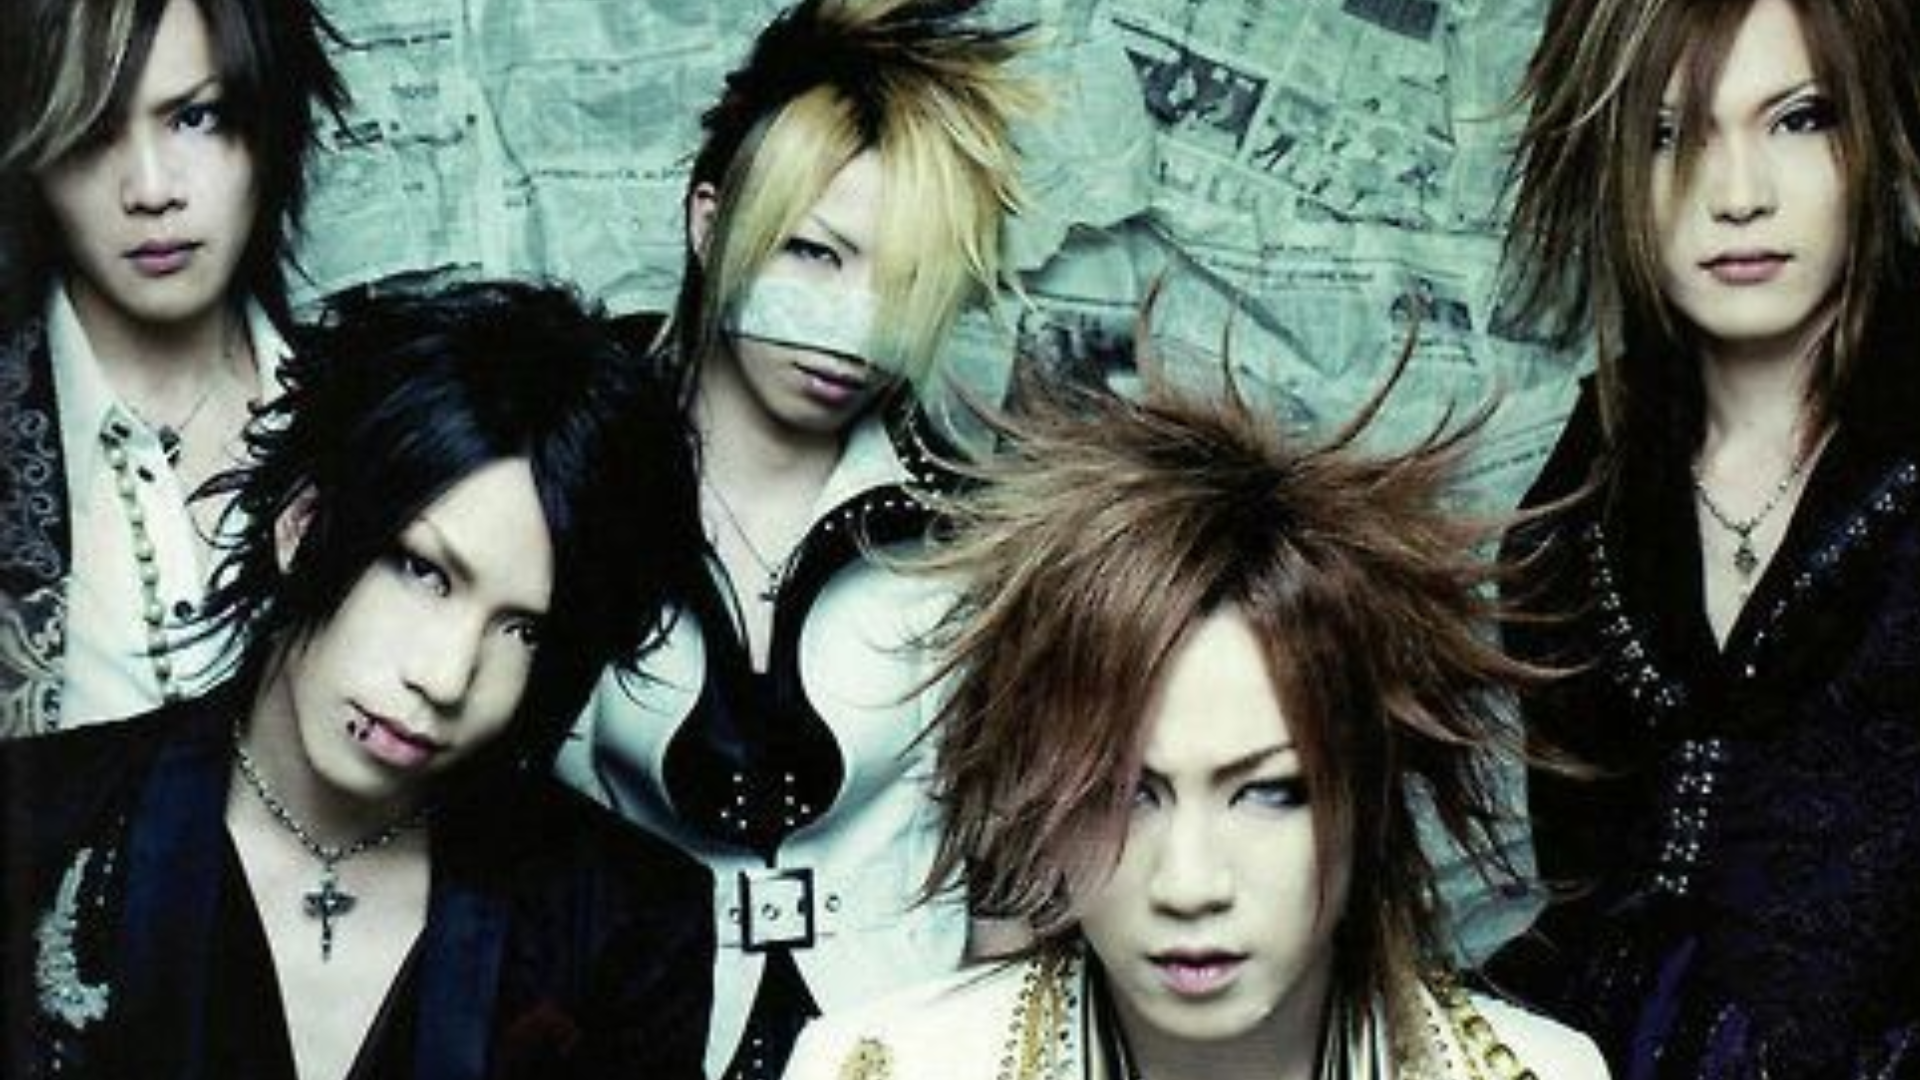 <p>The Gazette is also known for other hit songs such as ‘SHIVER’, ‘PLEDGE’, and ‘Cassis’.</p> <p>Image: PS Company</p>